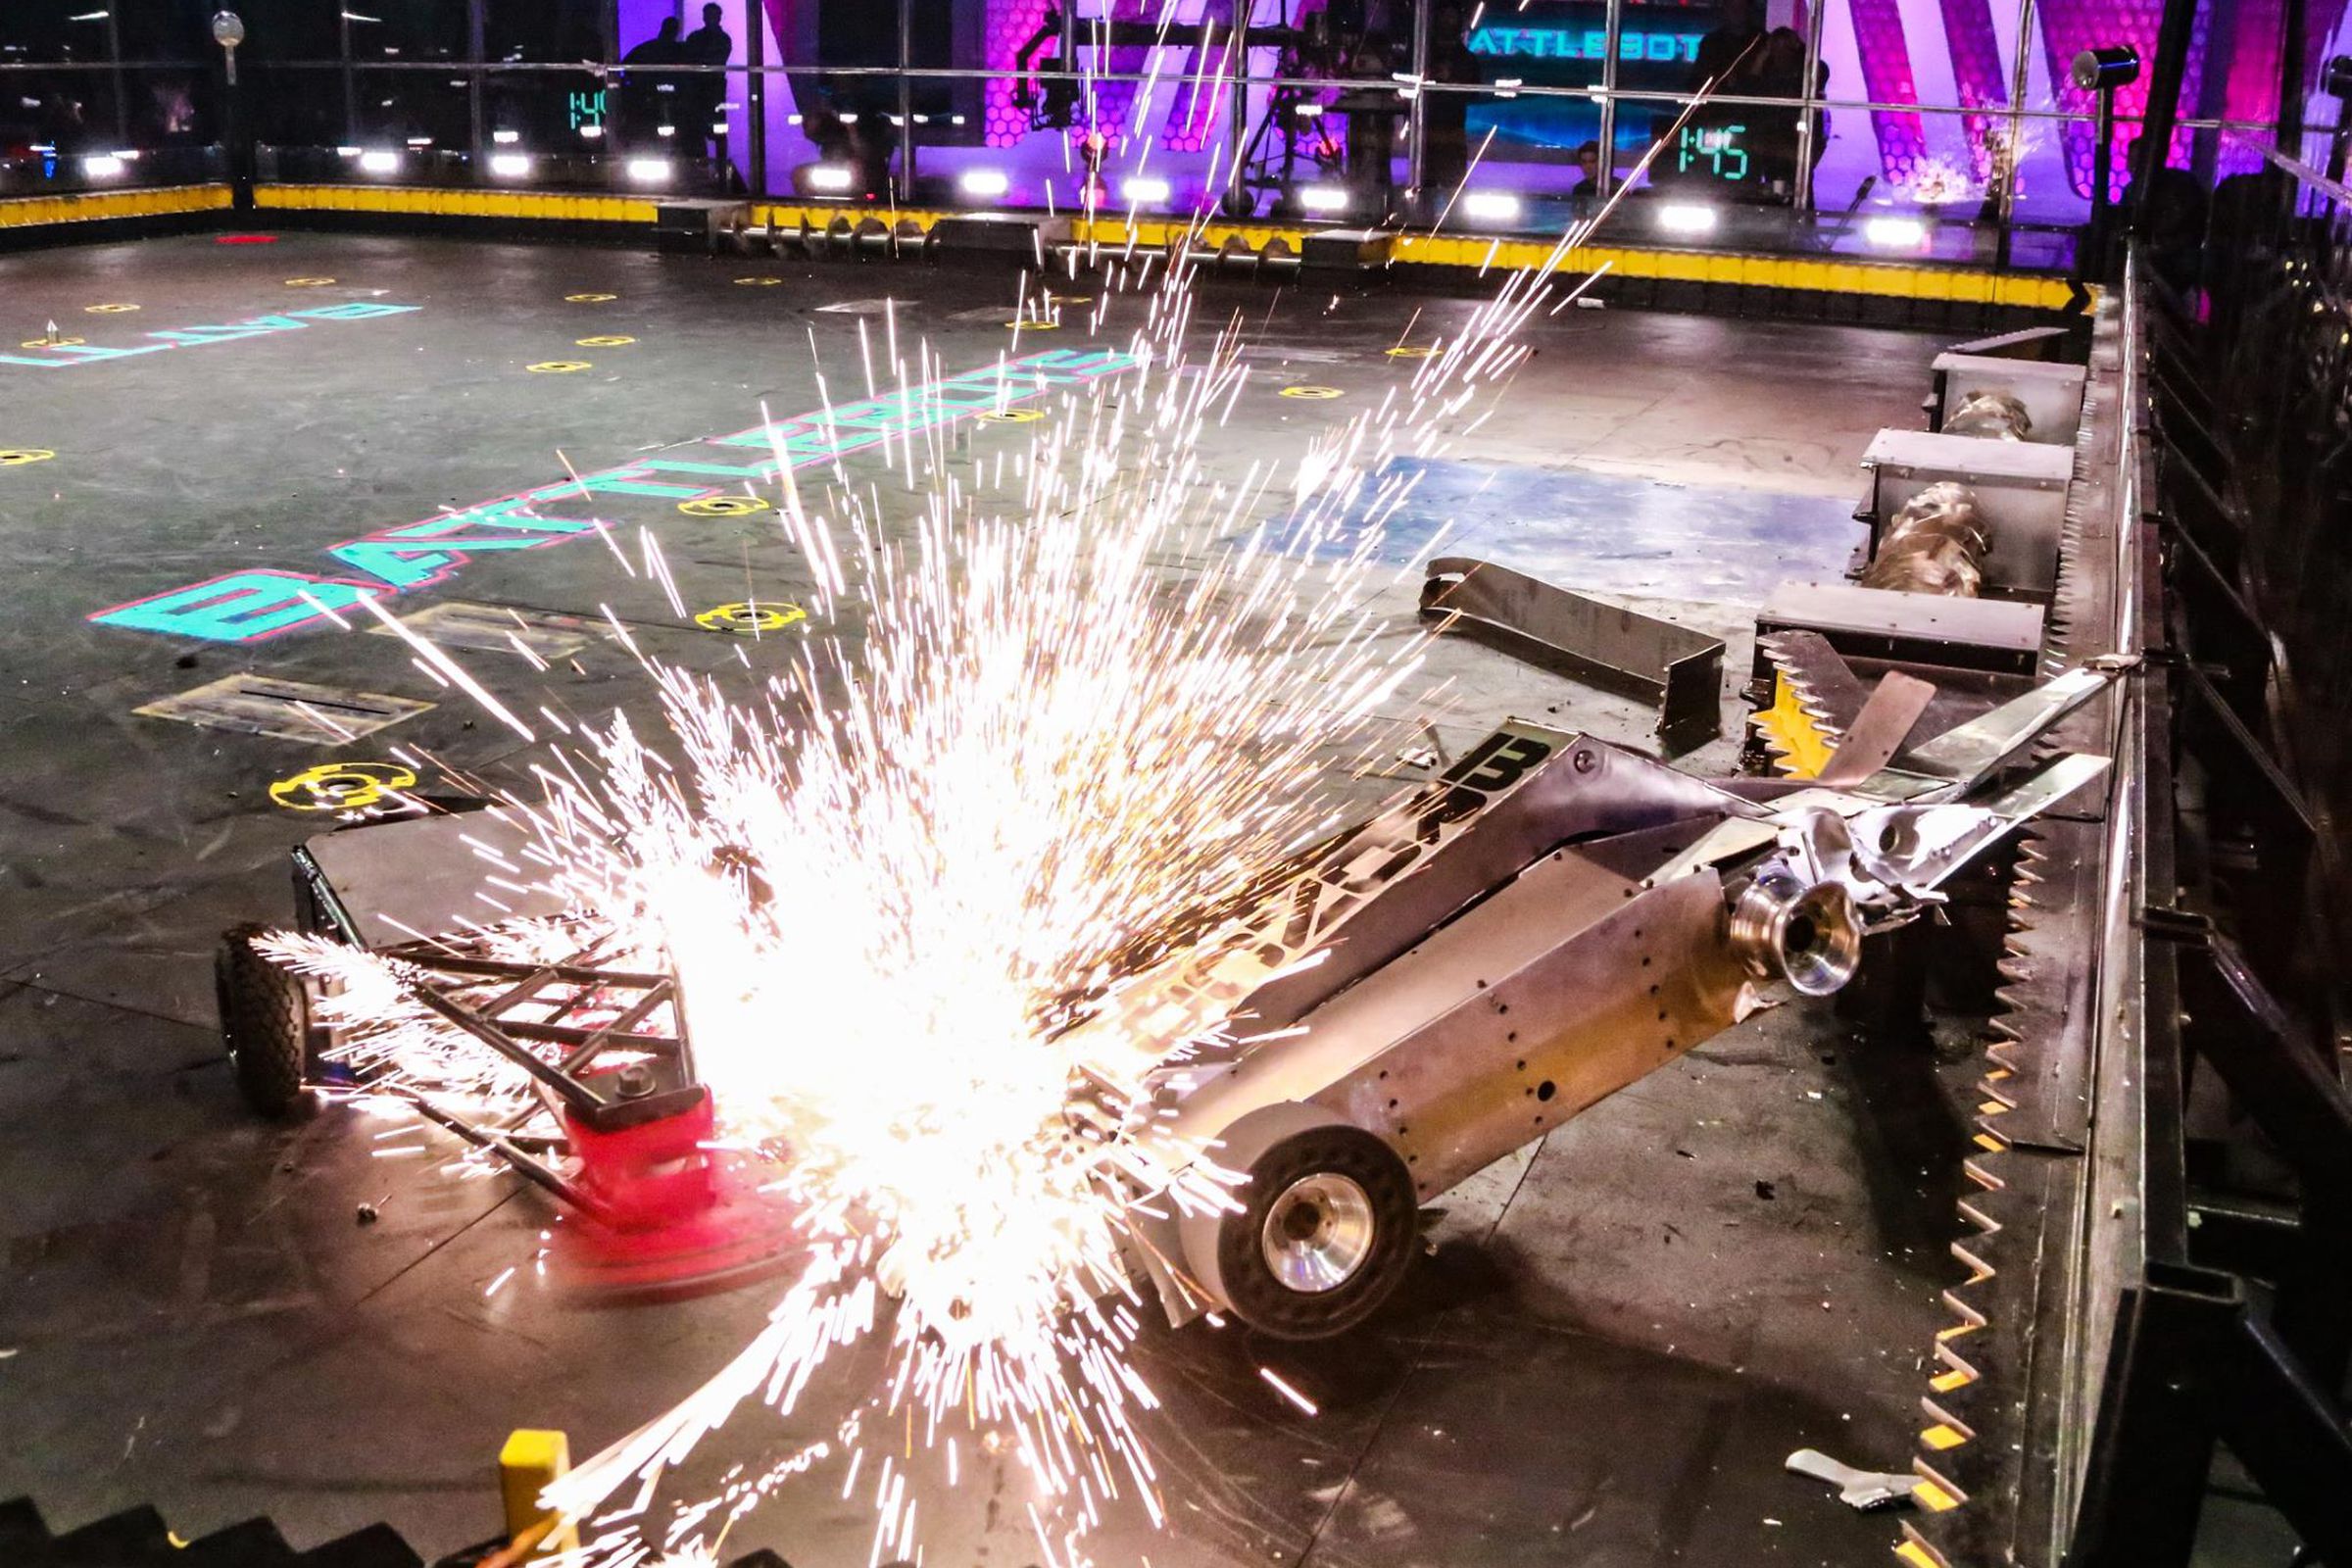 BattleBots is coming back for a second season on ABC The Verge